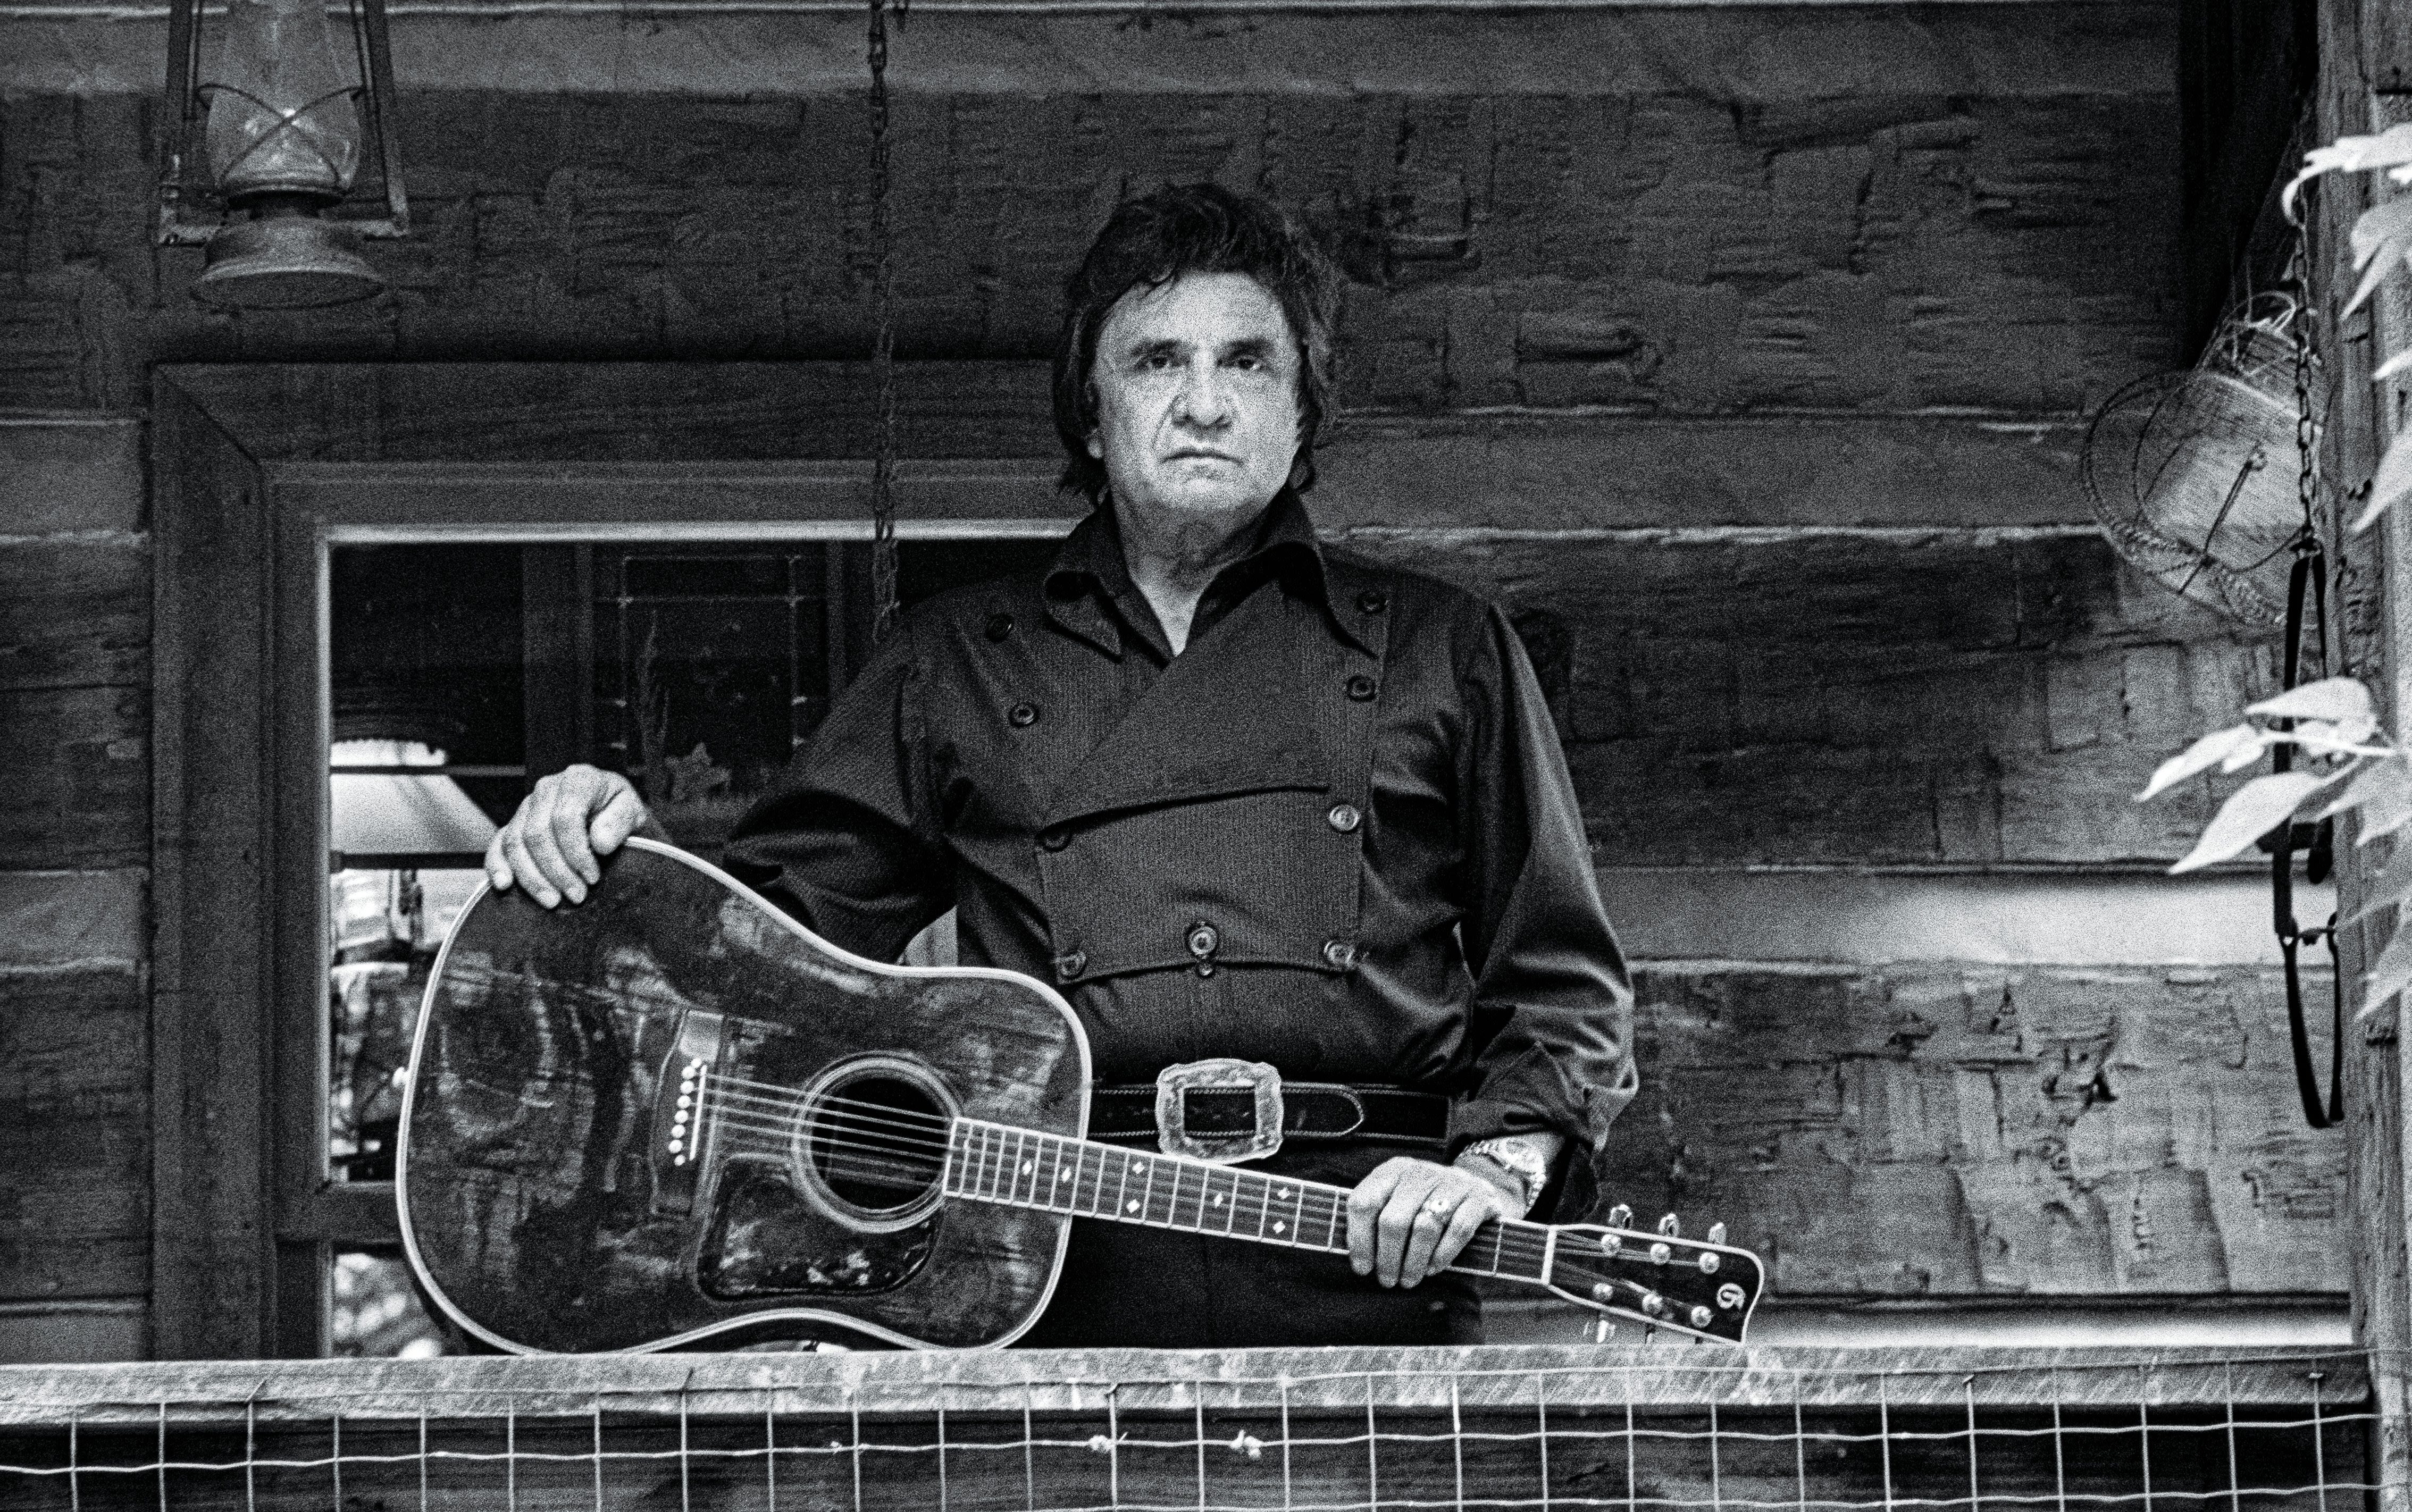 New Johnny Cash Album, ‘Songwriter,’ Brings to Light 11 Original Compositions He Recorded but Never Released in 1993